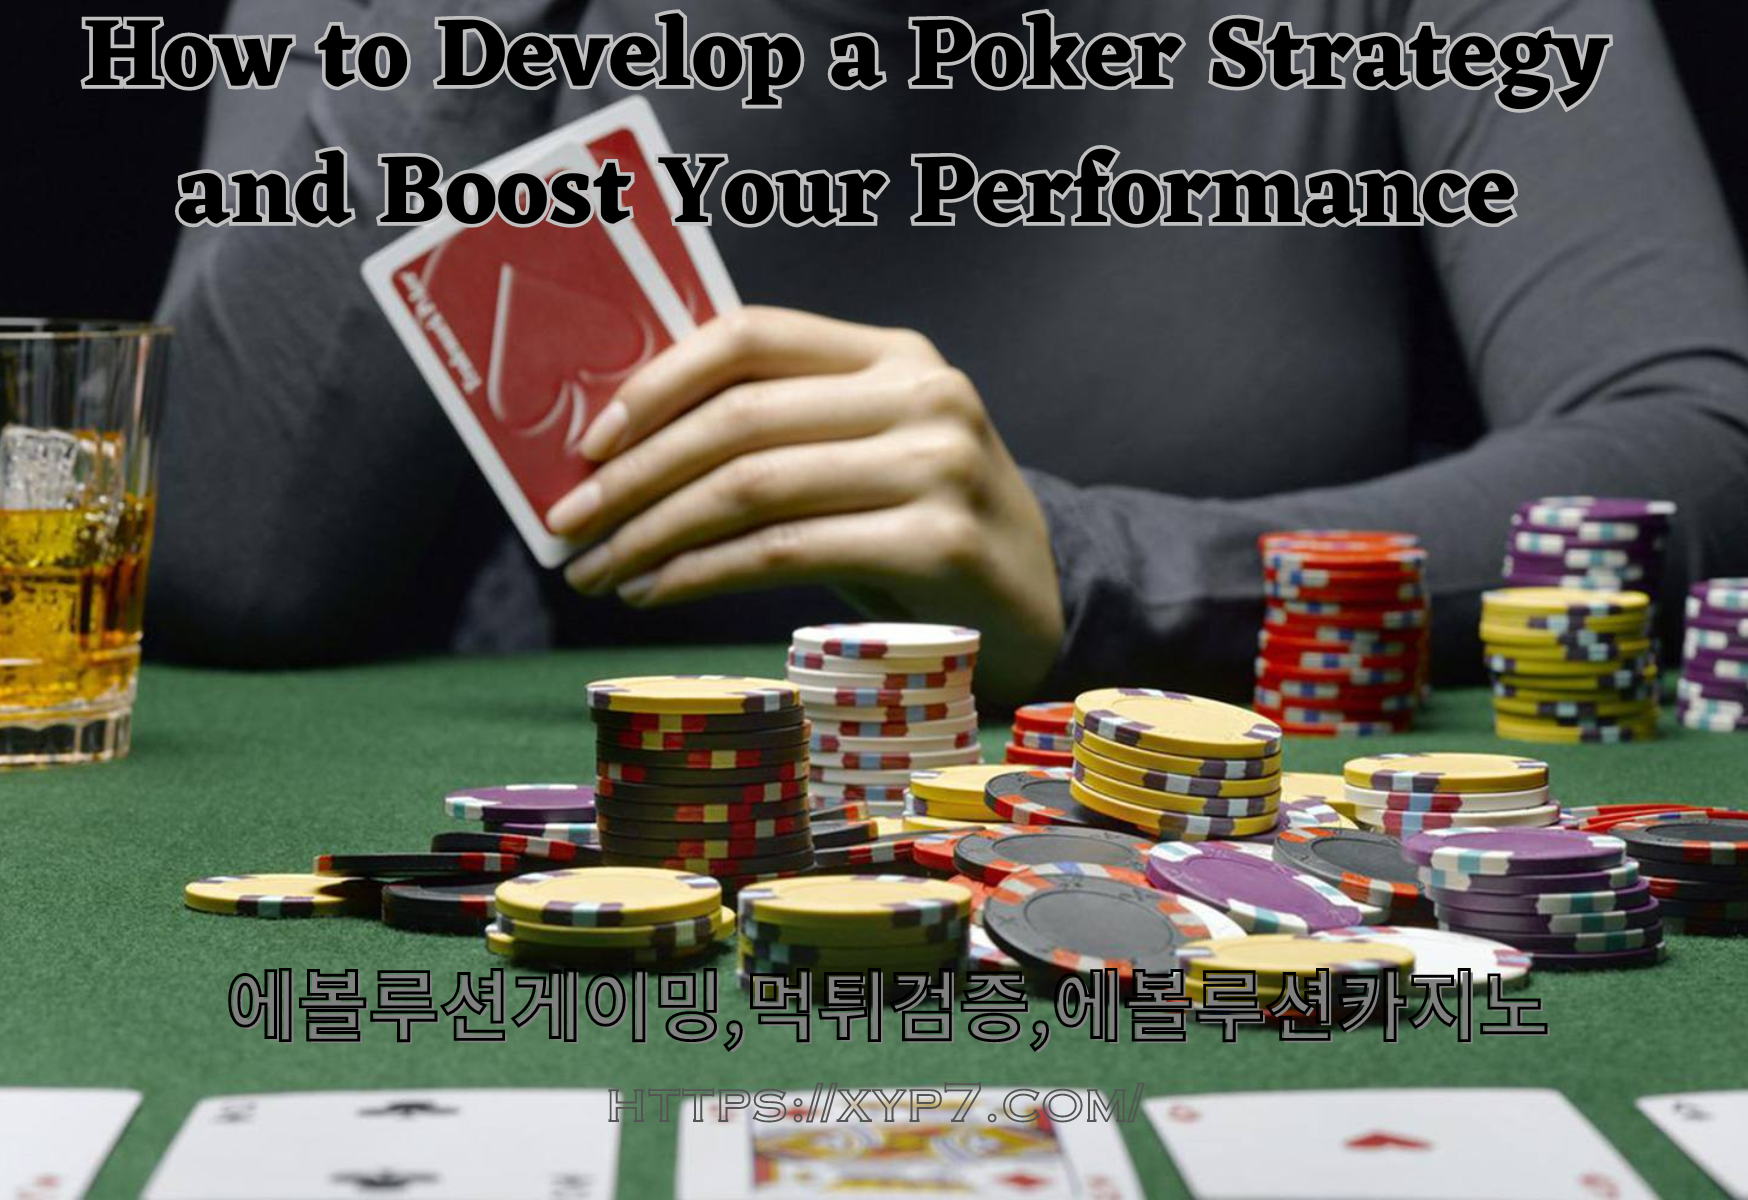 How to Develop a Poker Strategy and Boost Your Performance